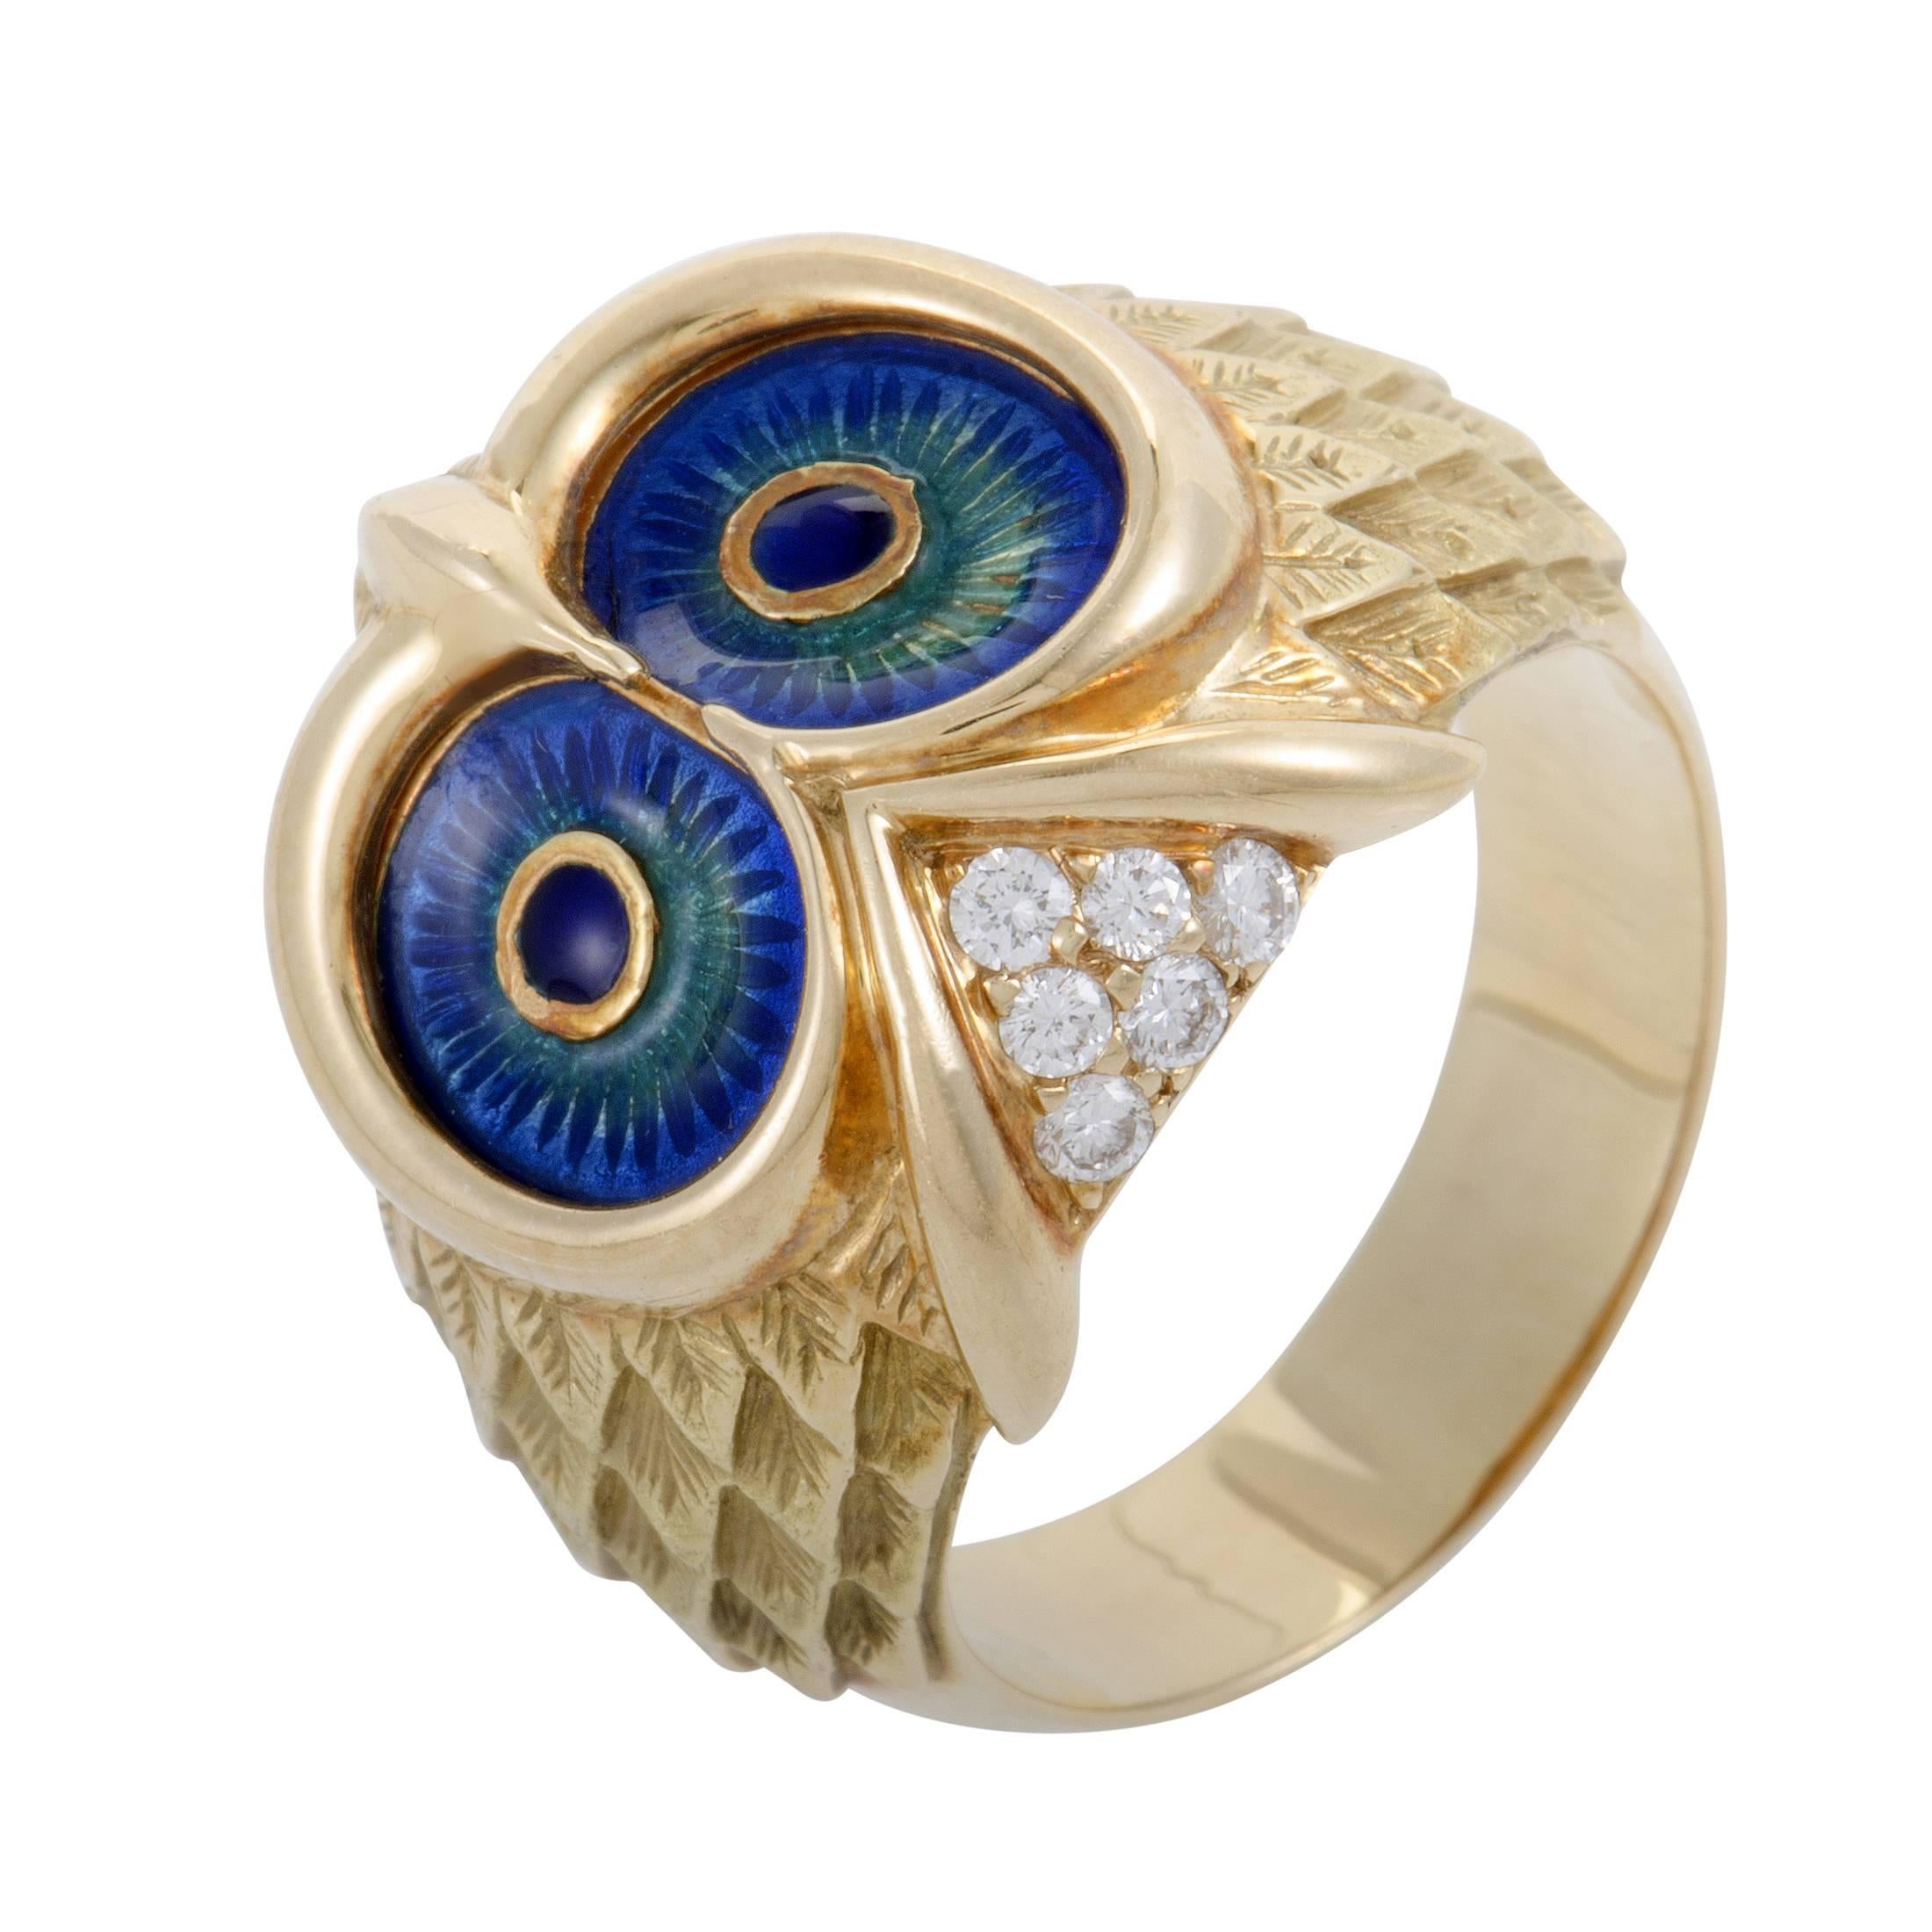 Exquisite enamel produces a mesmerizing sight in this amazing 18K yellow gold ring by brilliantly depicting an owl's piercing eyes while complemented by lustrous diamond for an enchanting overall appearance.
Ring Size: 7.5
Band Thickness: 7mm
Ring